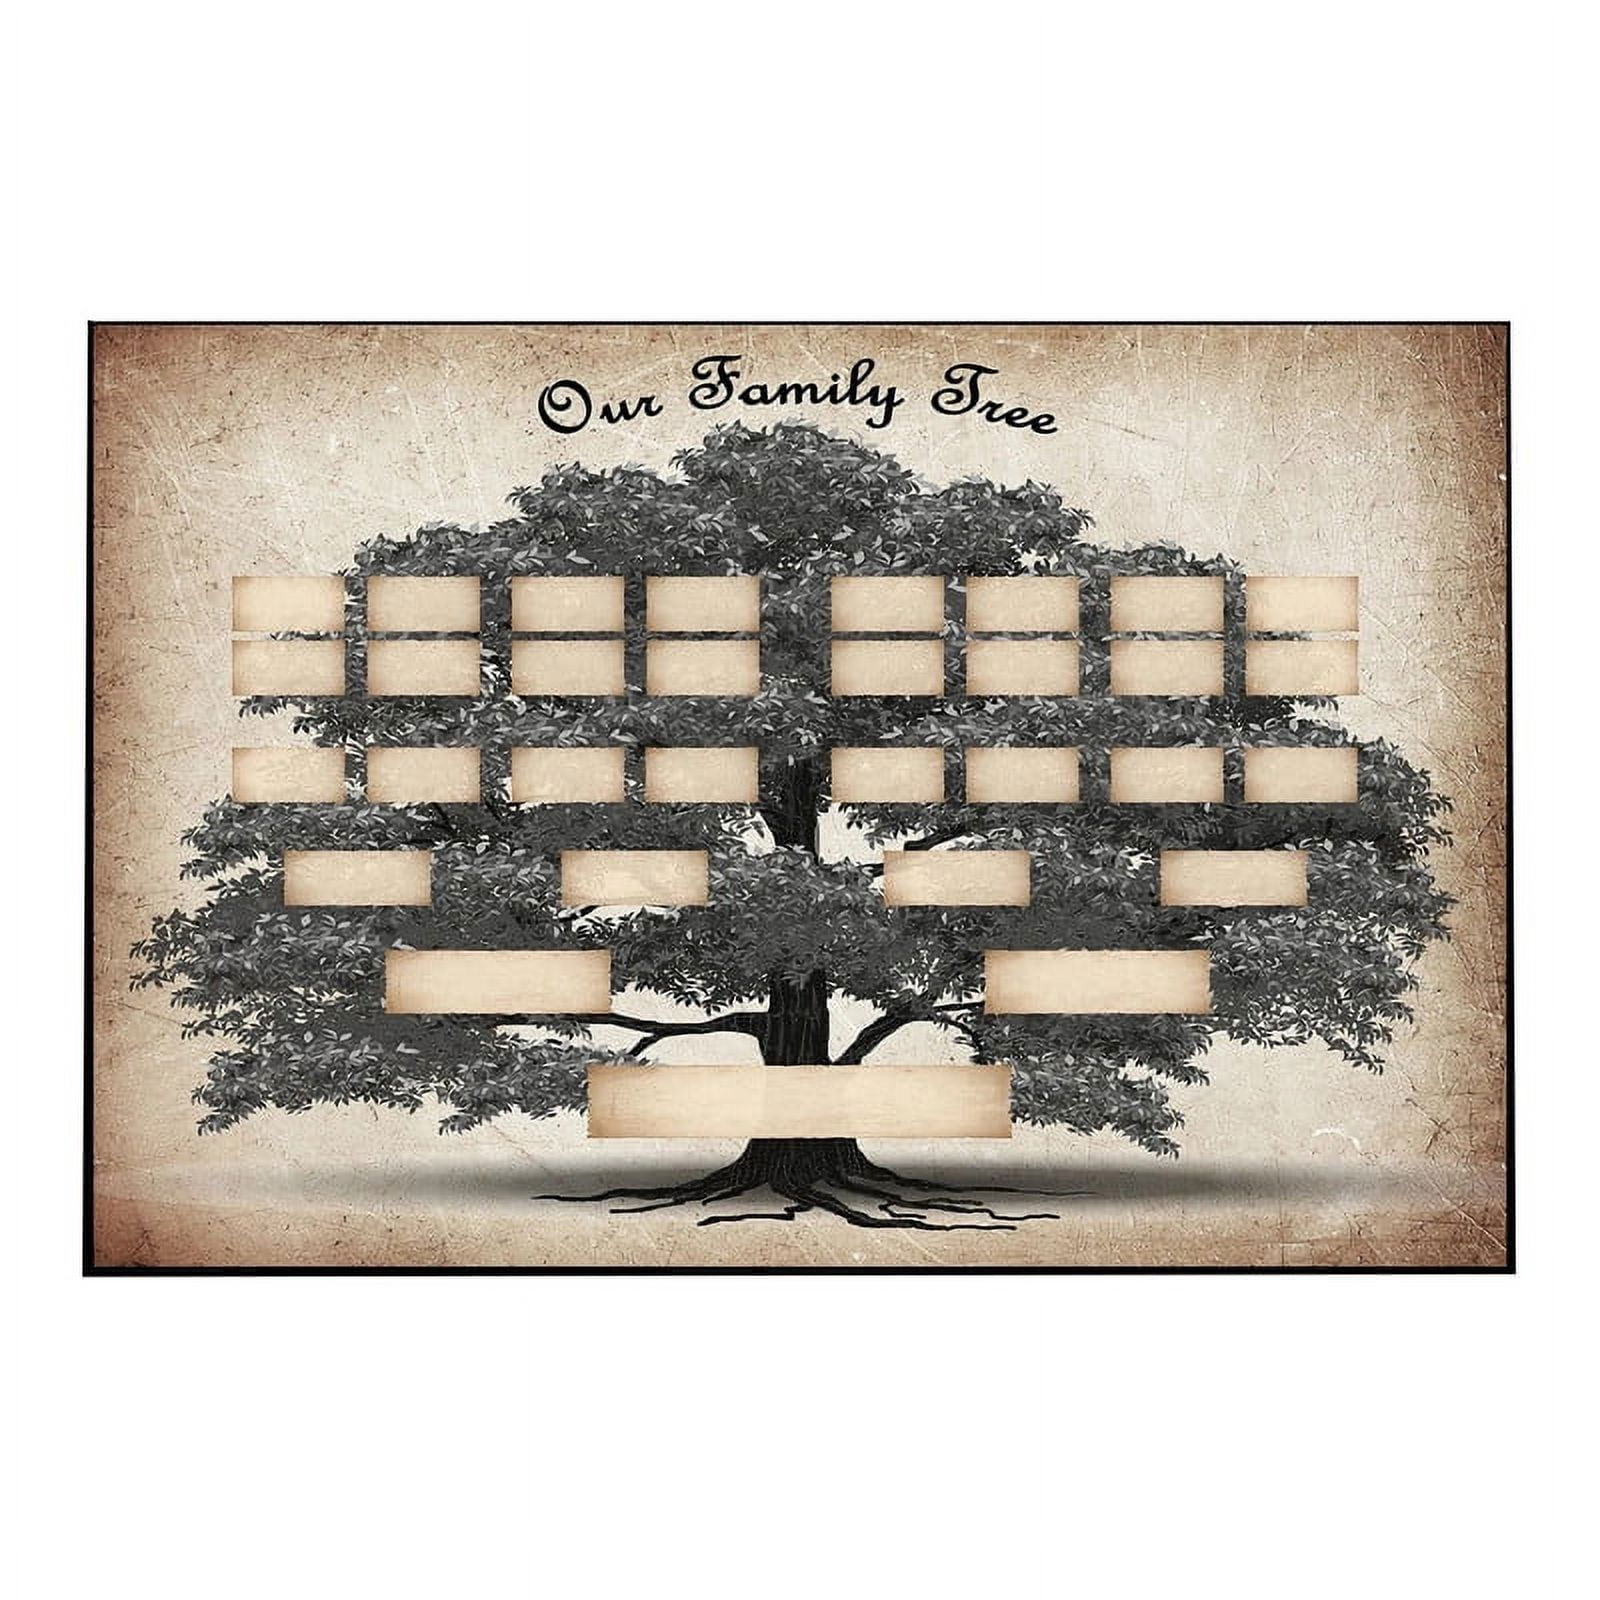 Family Tree Charts to Fill in Fillable Genealogy Charts Blank Family Tree  Family Tree Charts Poster Geneology Charts Fill in Family Tree Diagram 40 *